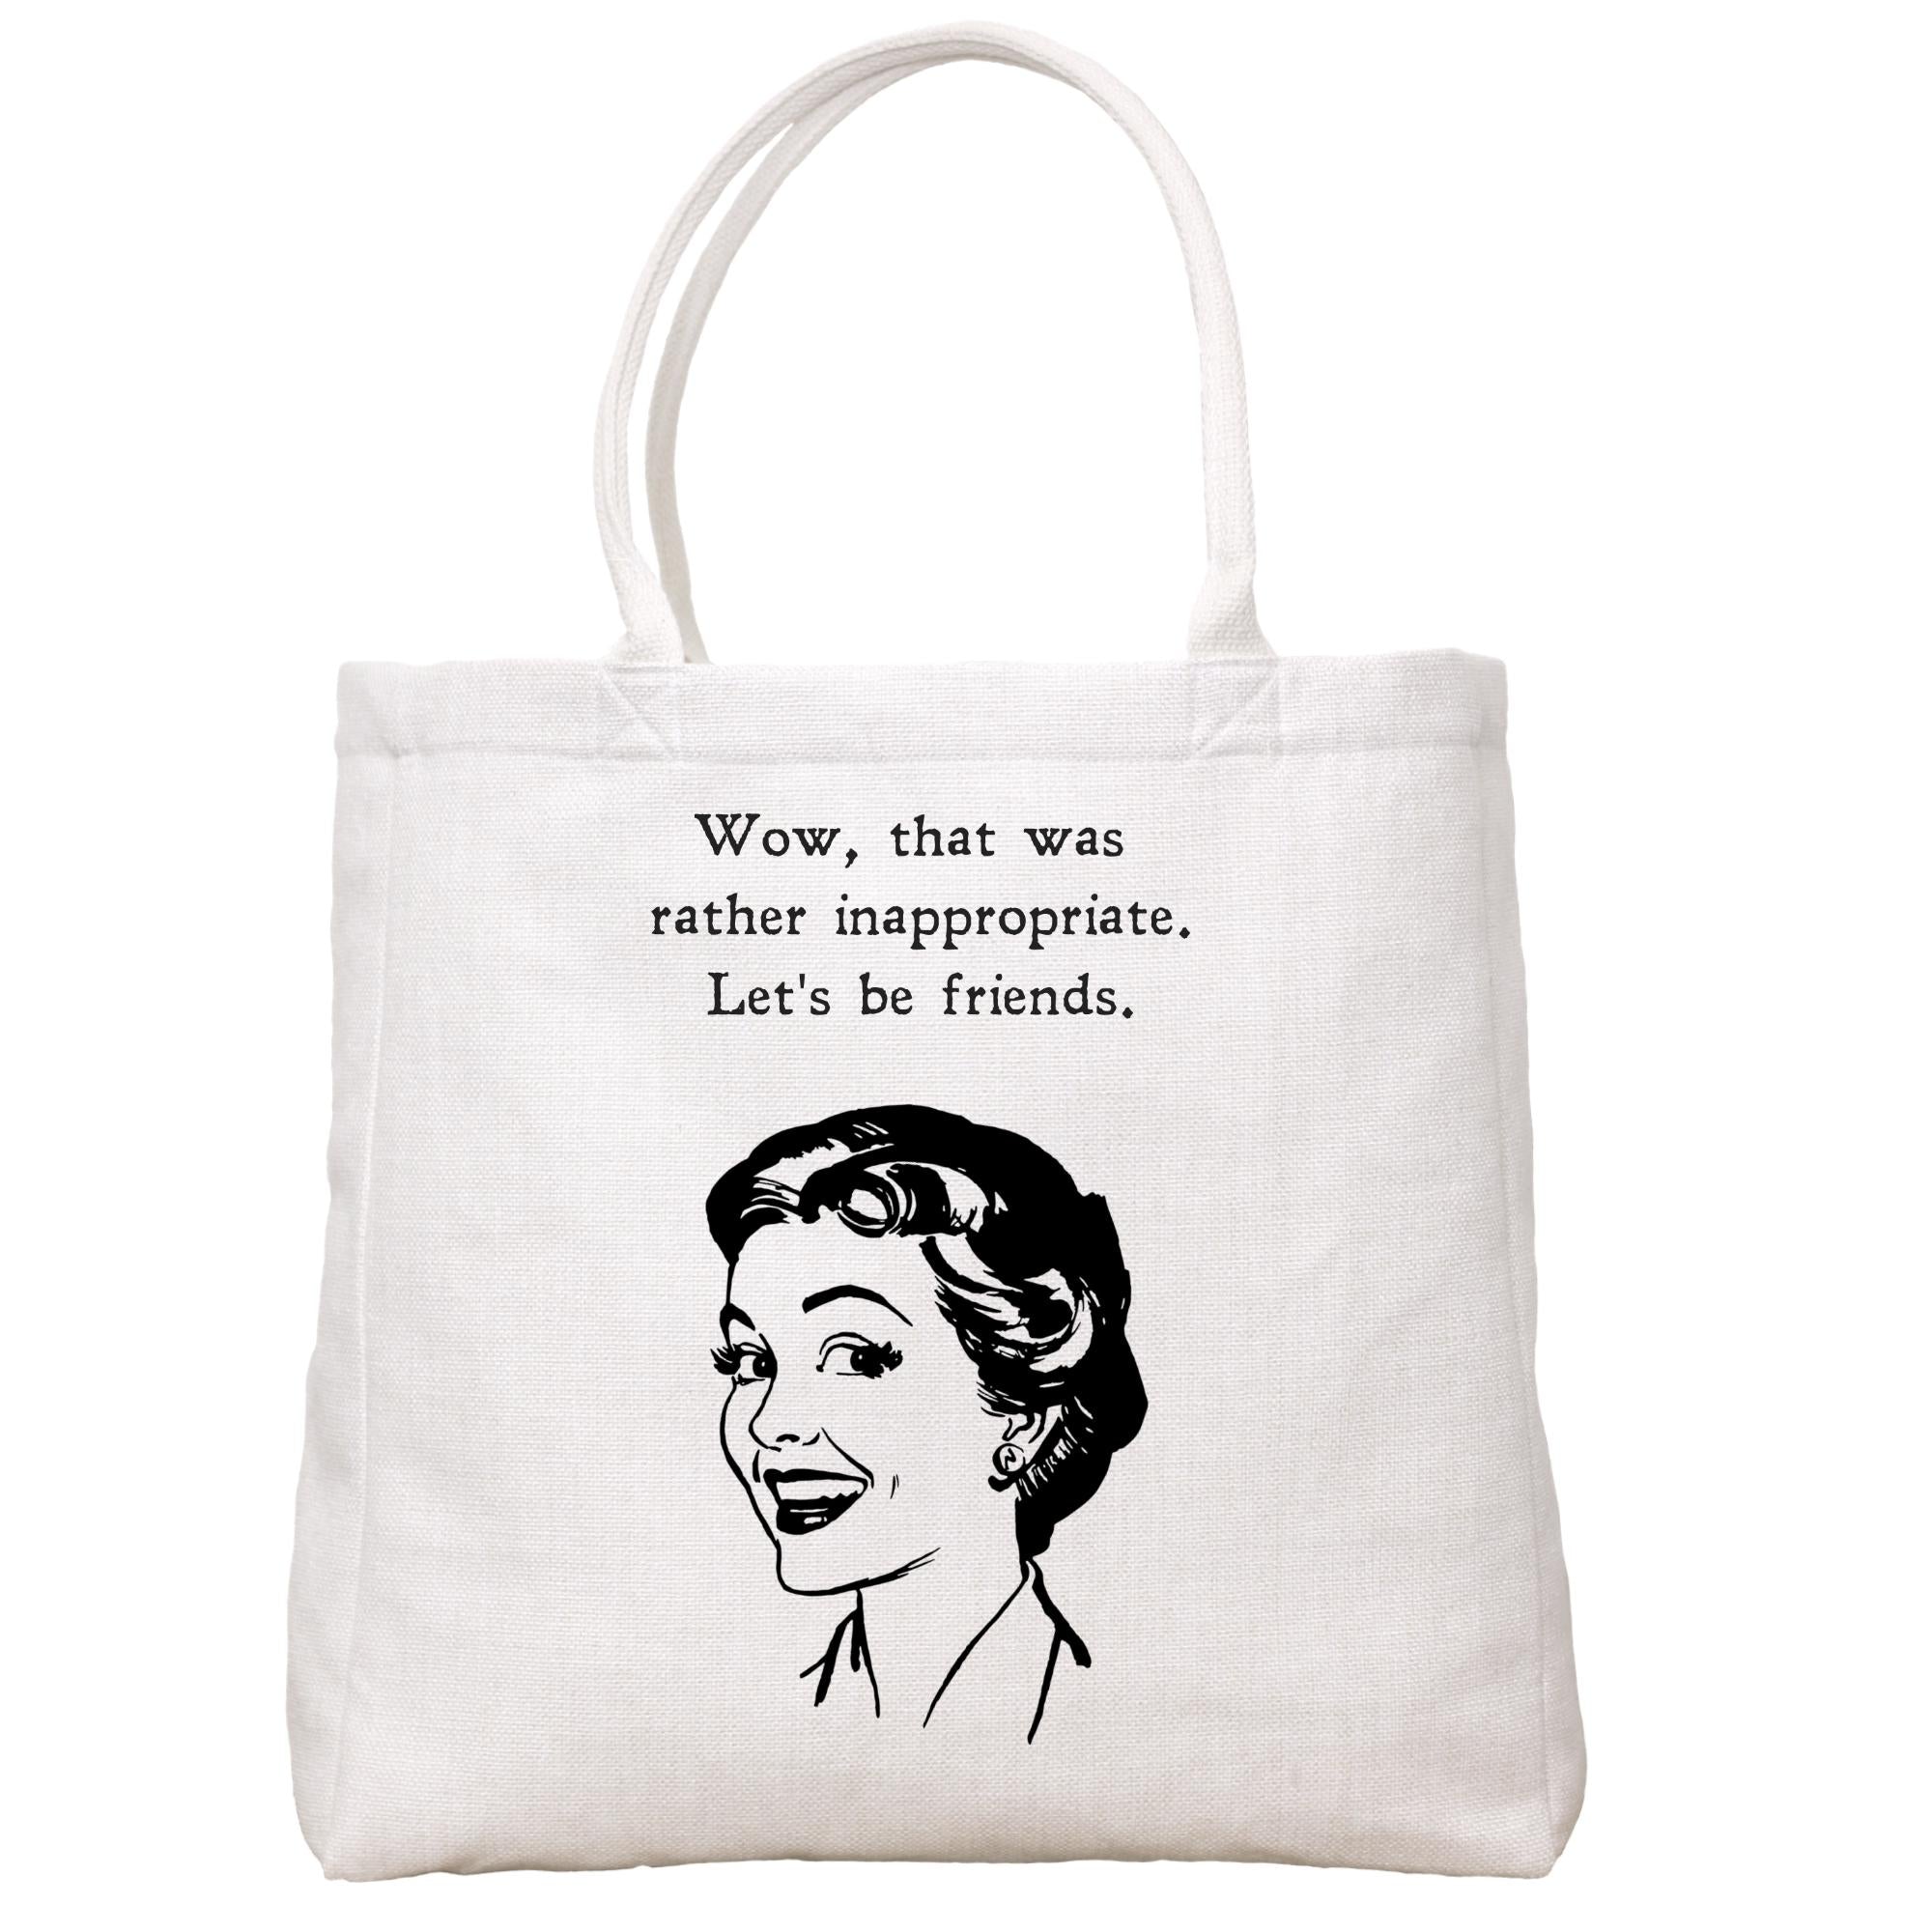 Let's Be Friends Tote Bag Tote Bag - Southern Sisters